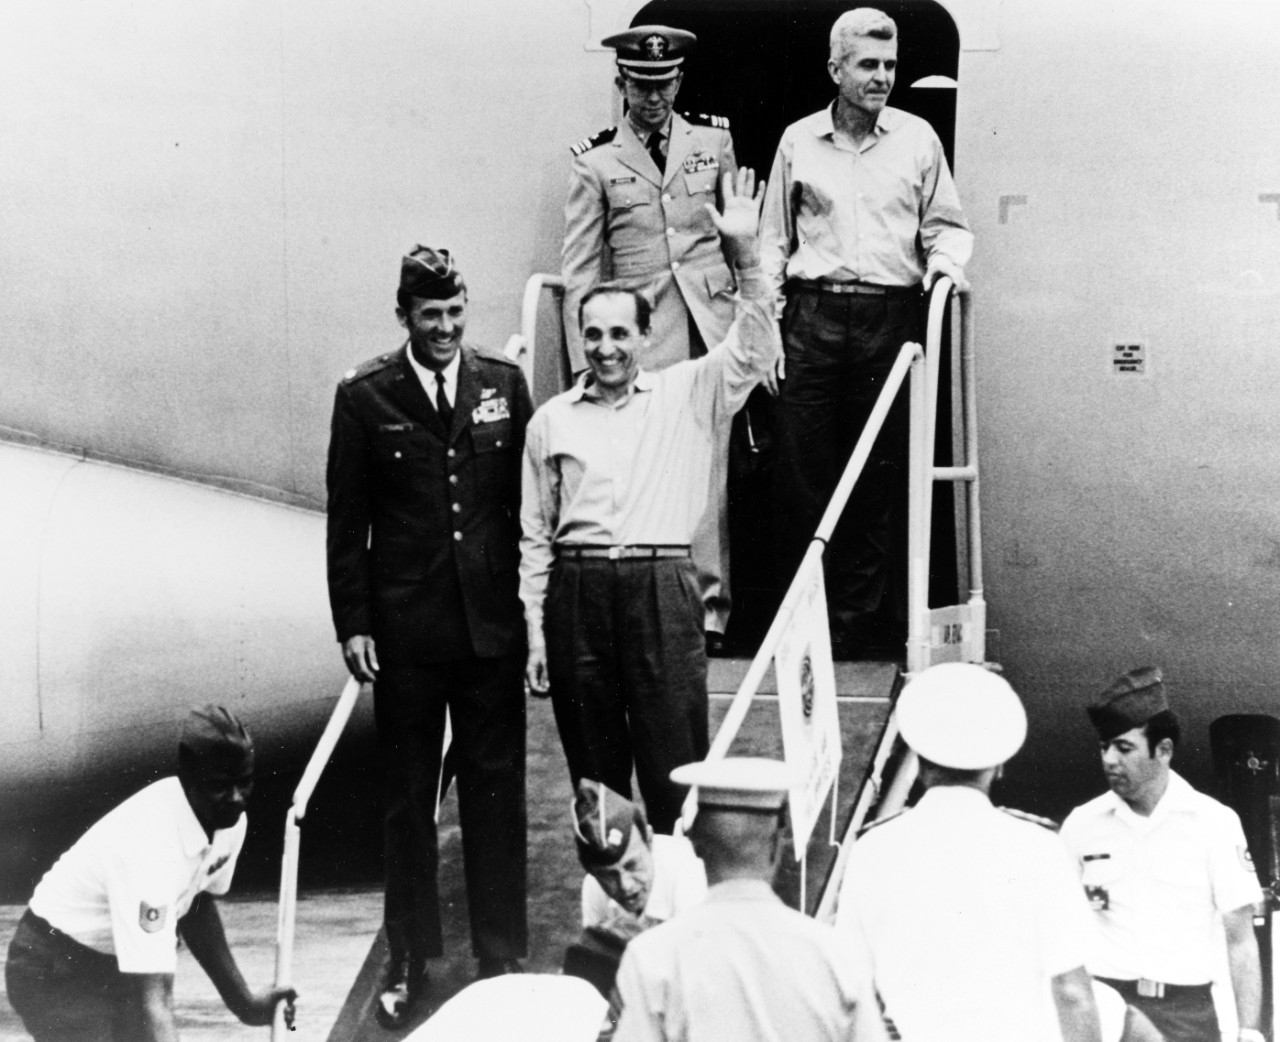 Two of the returned prisoners of war step from the second U.S. Air Force C-141 to leave Hanoi, at Clark Air Force Base, Philippine Islands, in February 1973. They are: Colonel Robinson Risner, USAF (waving), and Captain James Stockdale, USN. Their escorts are Major Leroy W. Thornal, USAF, and Lieutenant Commander Elman J. Parrie, USN.